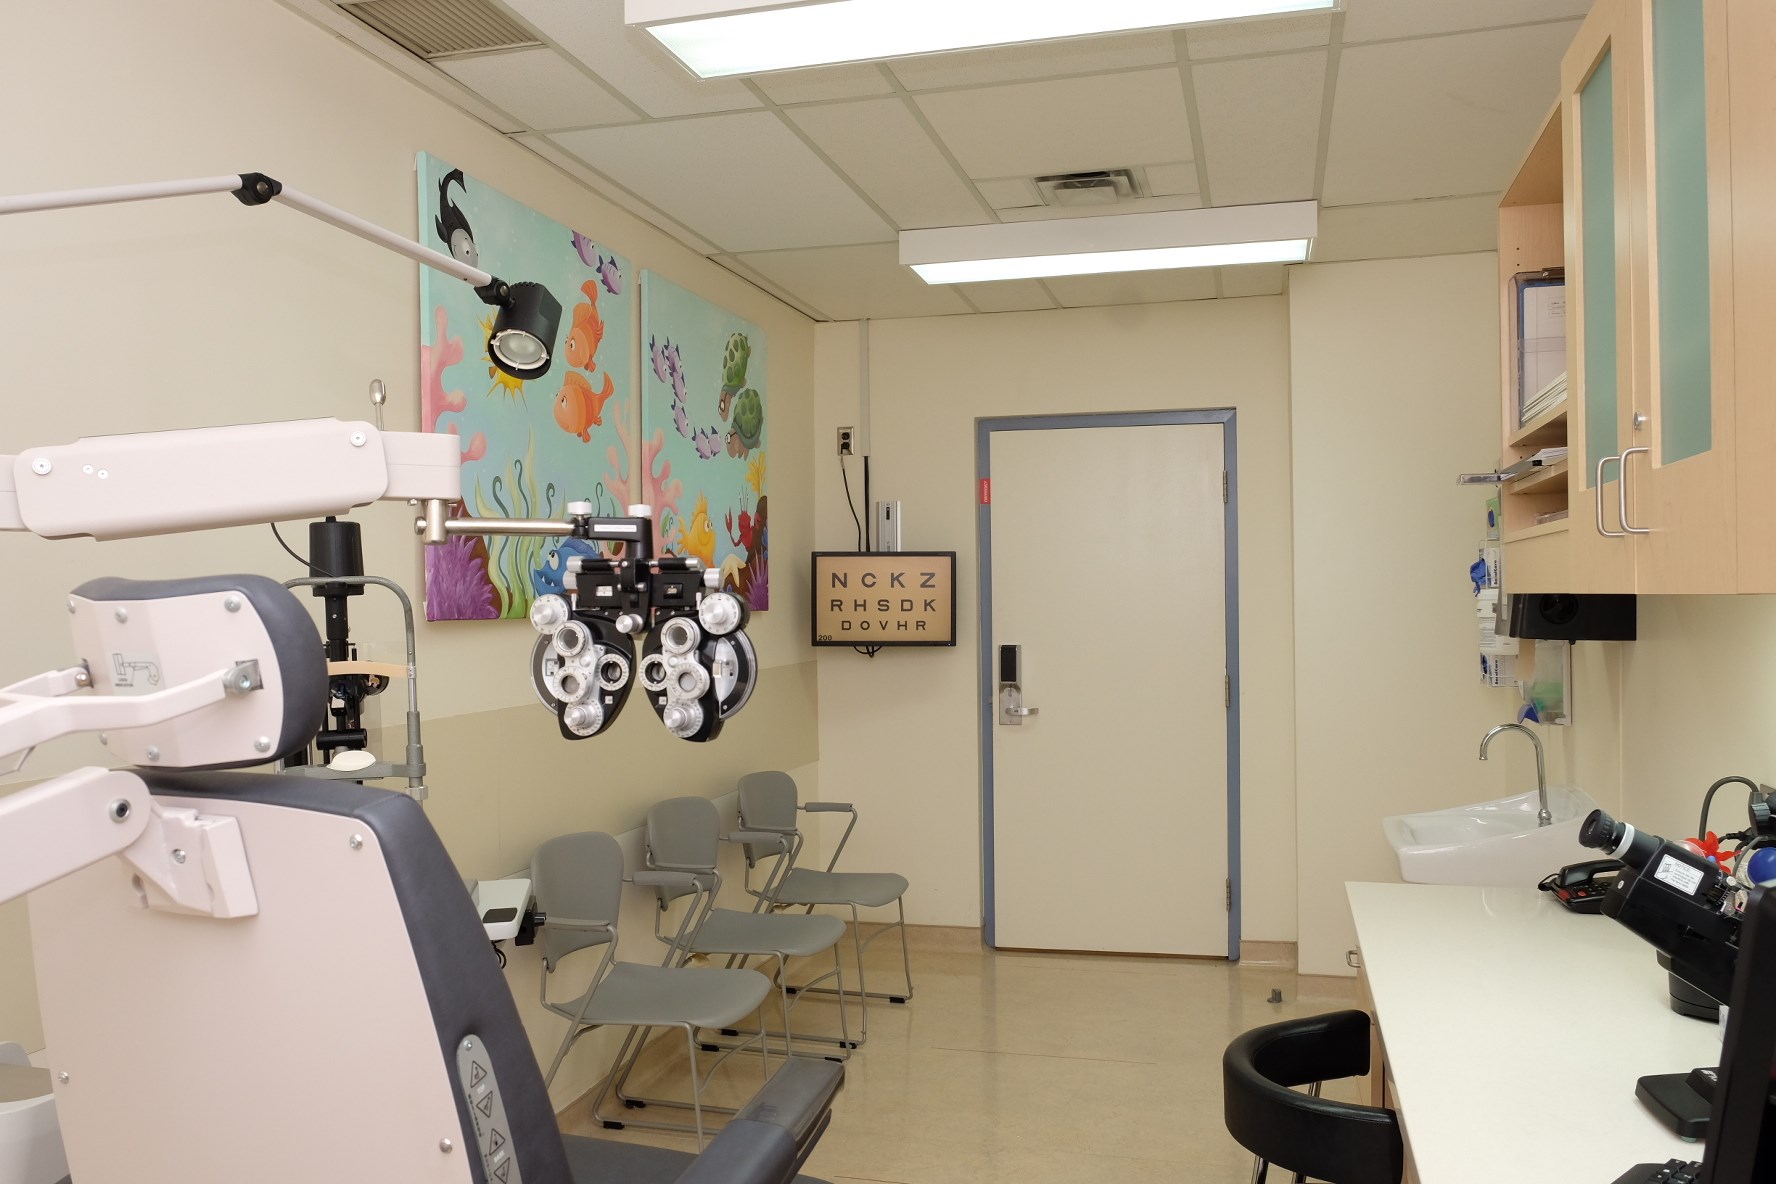 Vision sciences exam room with seats, desk and an patient chair